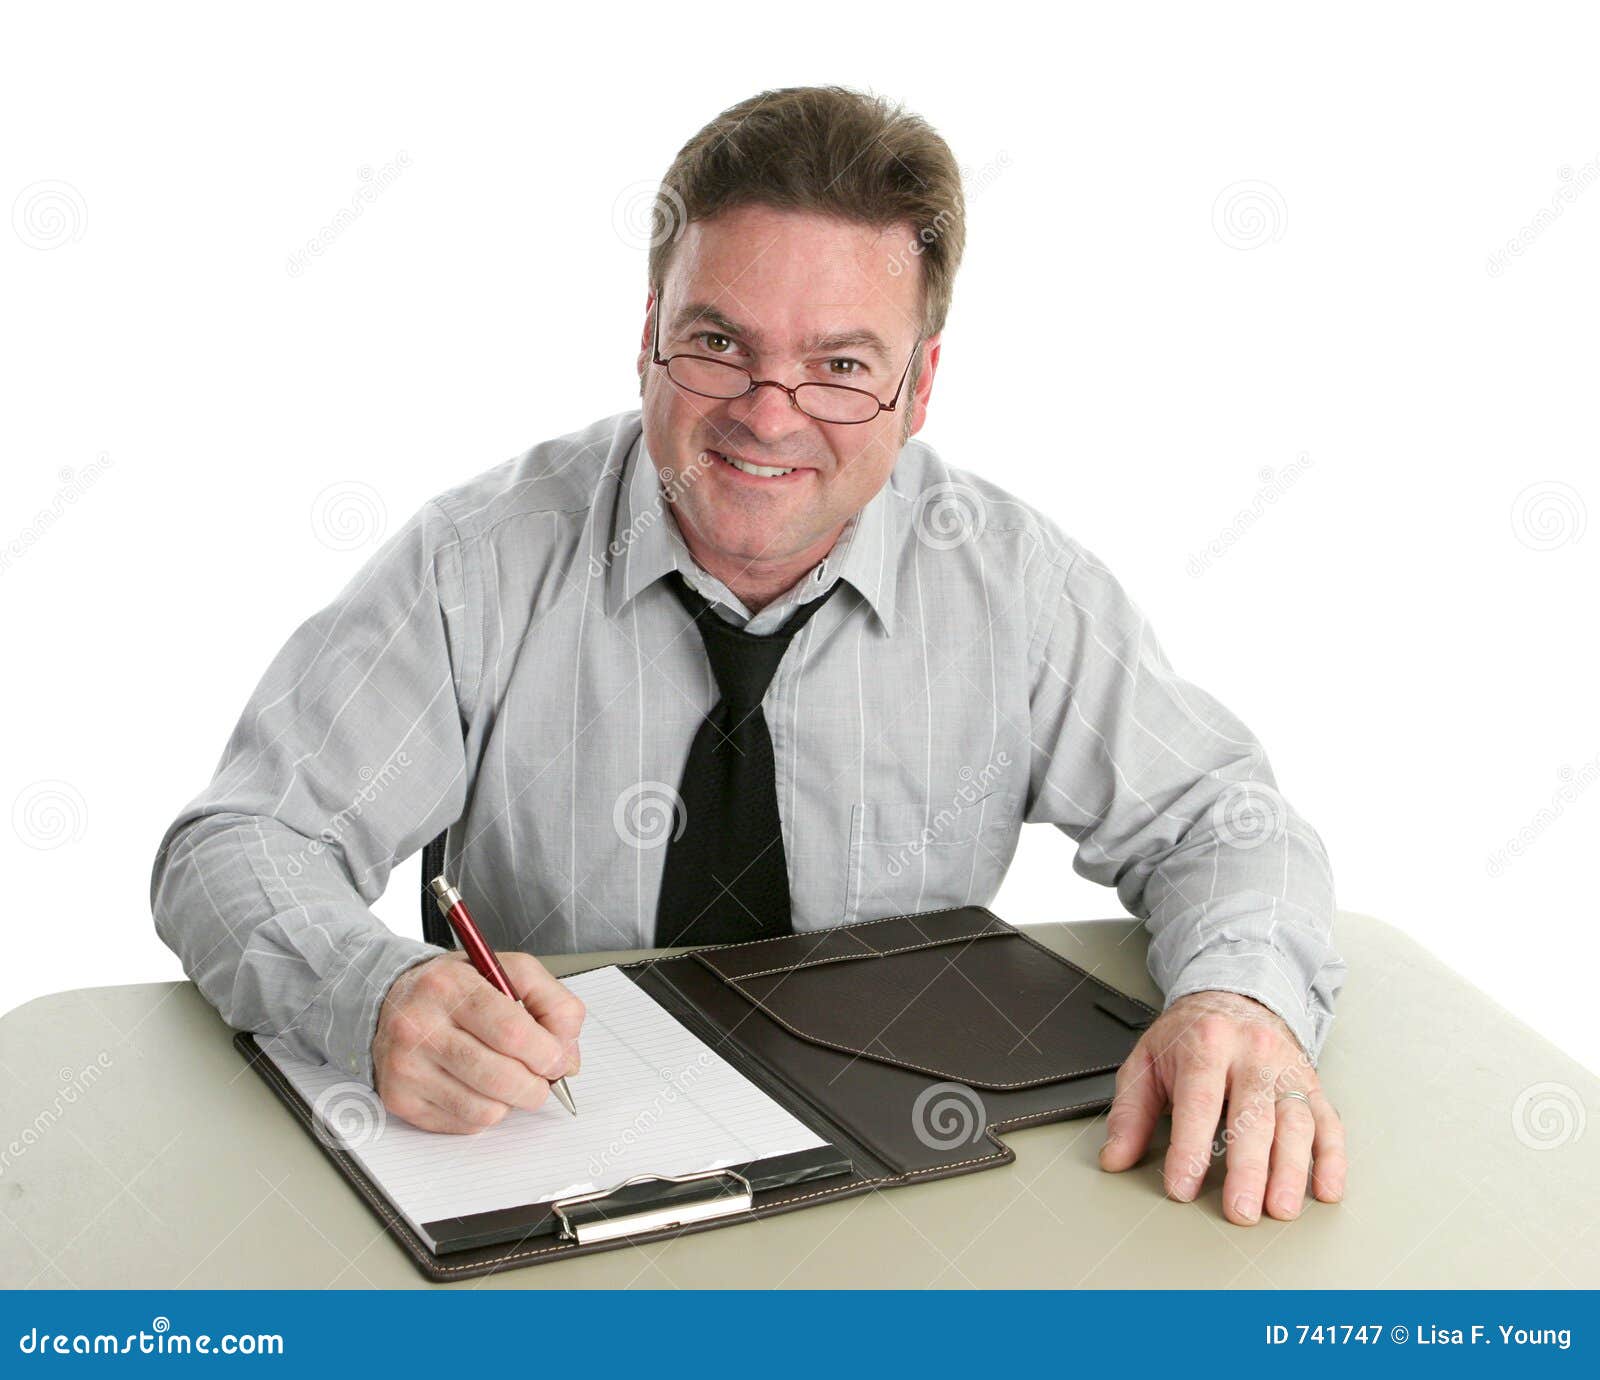 Office Worker - Helpful stock image. Image of help, administration - 741747